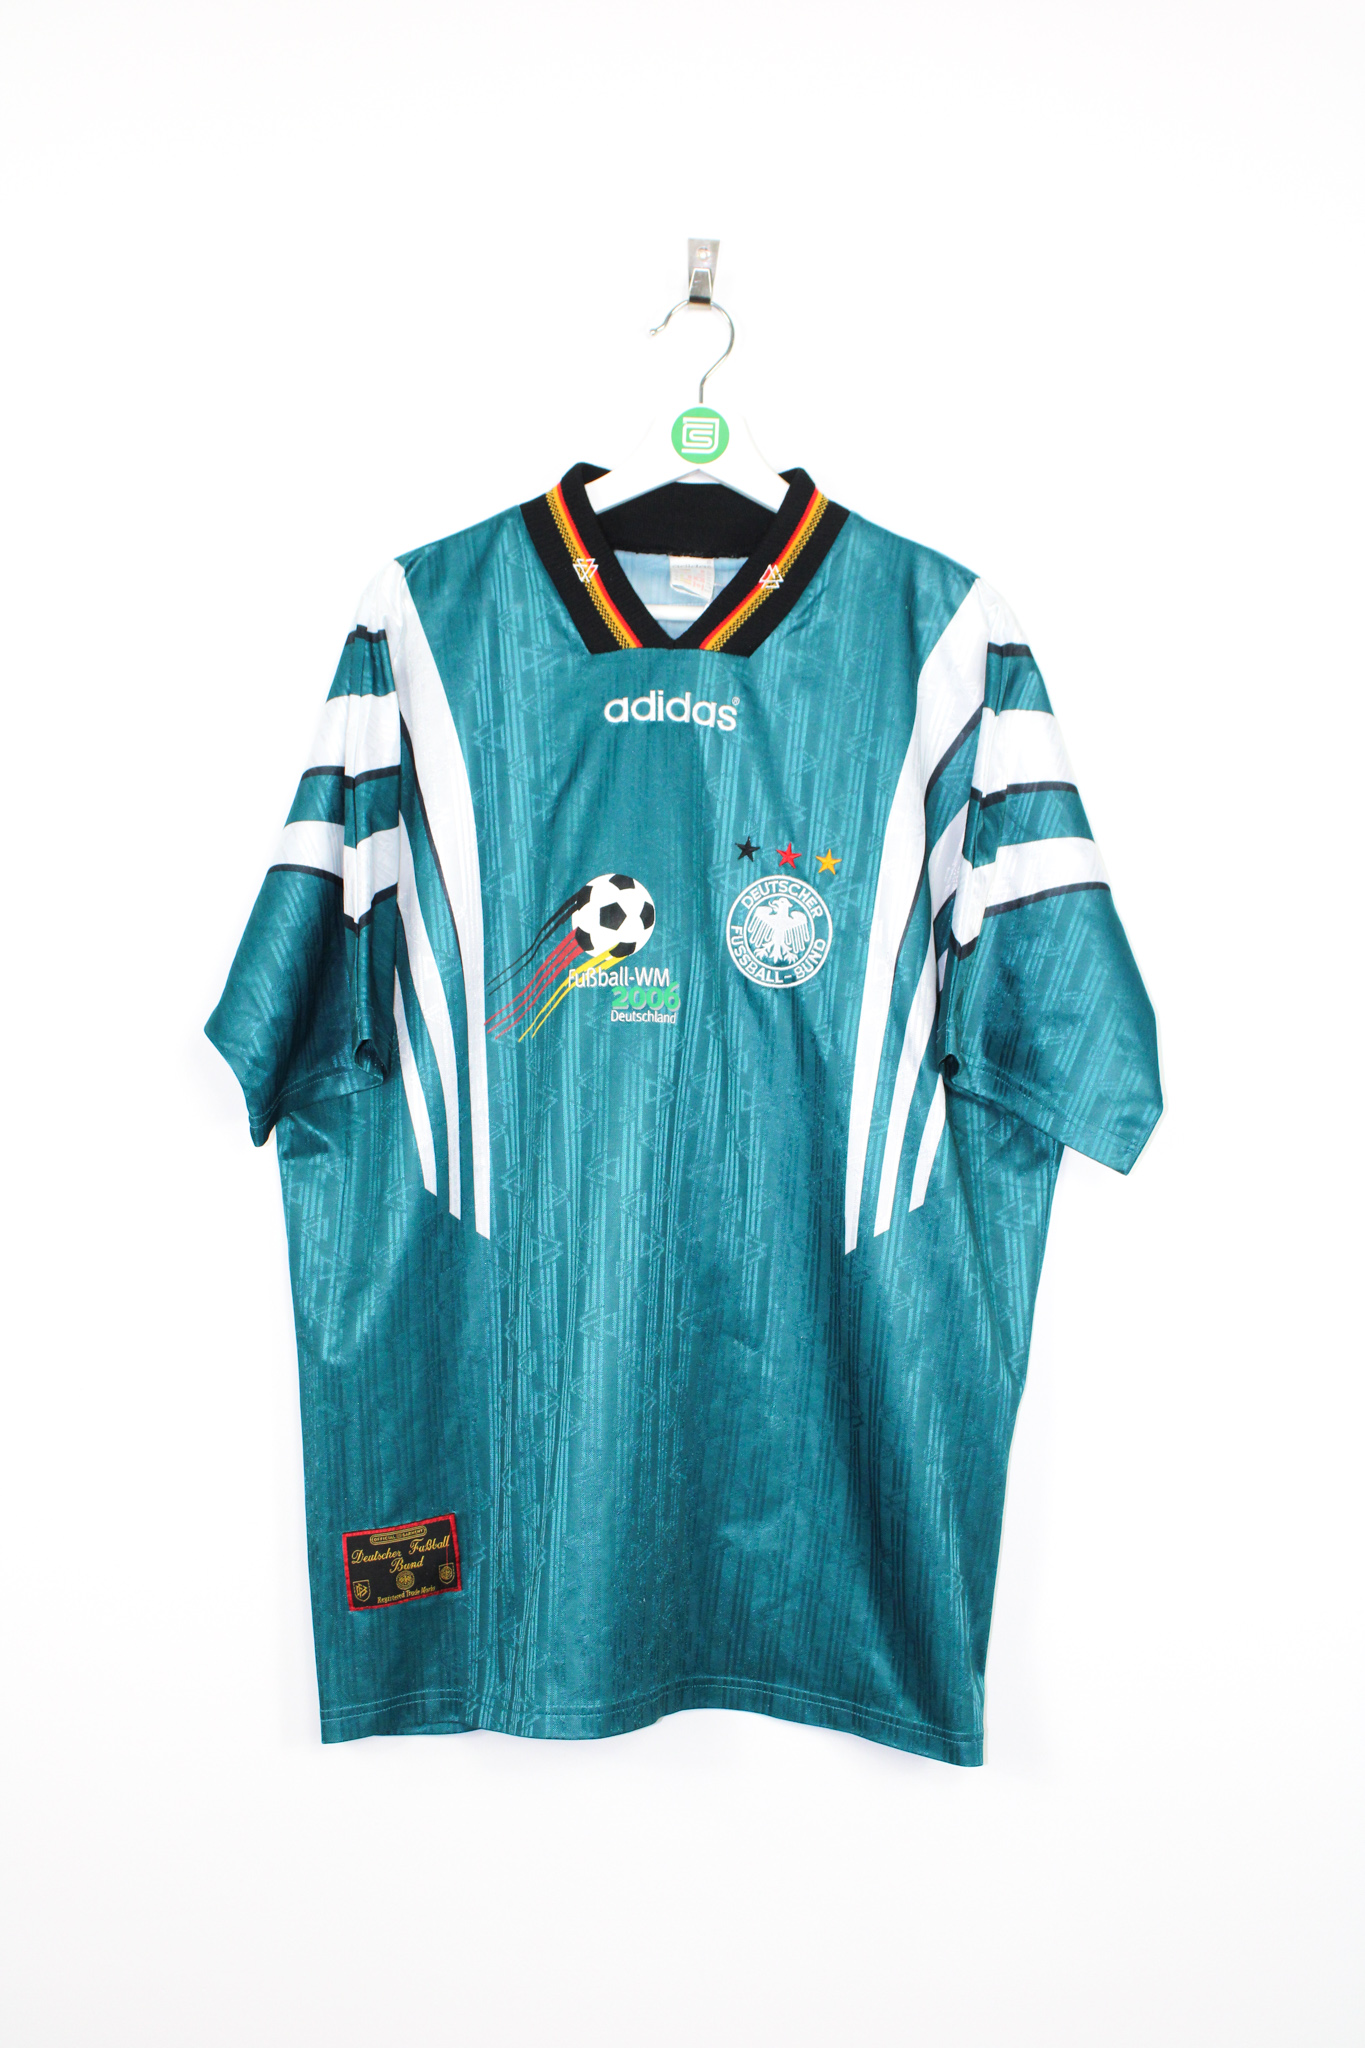 Vintage Adidas Germany home soccer jersey 1998/00